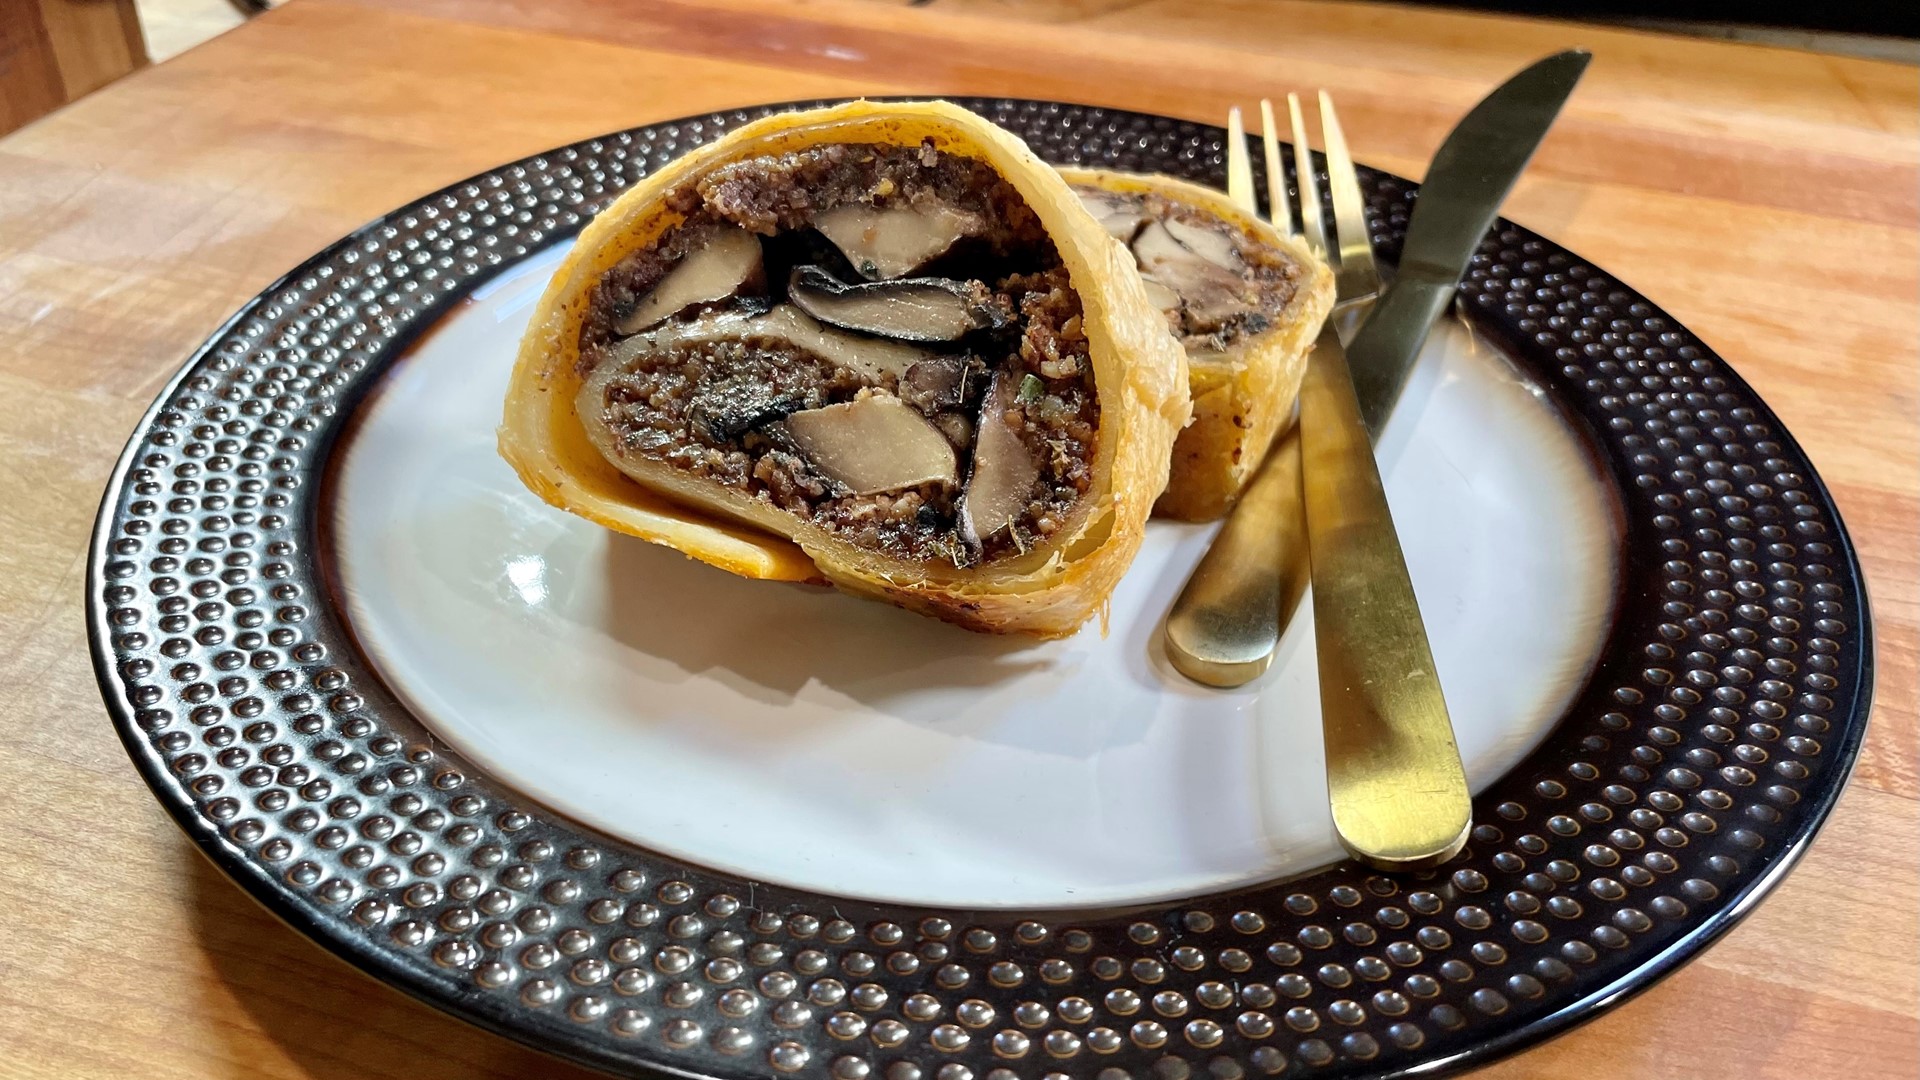 Forget the beef. This Wellington is stuffed with plant-based flavor. #k5evening